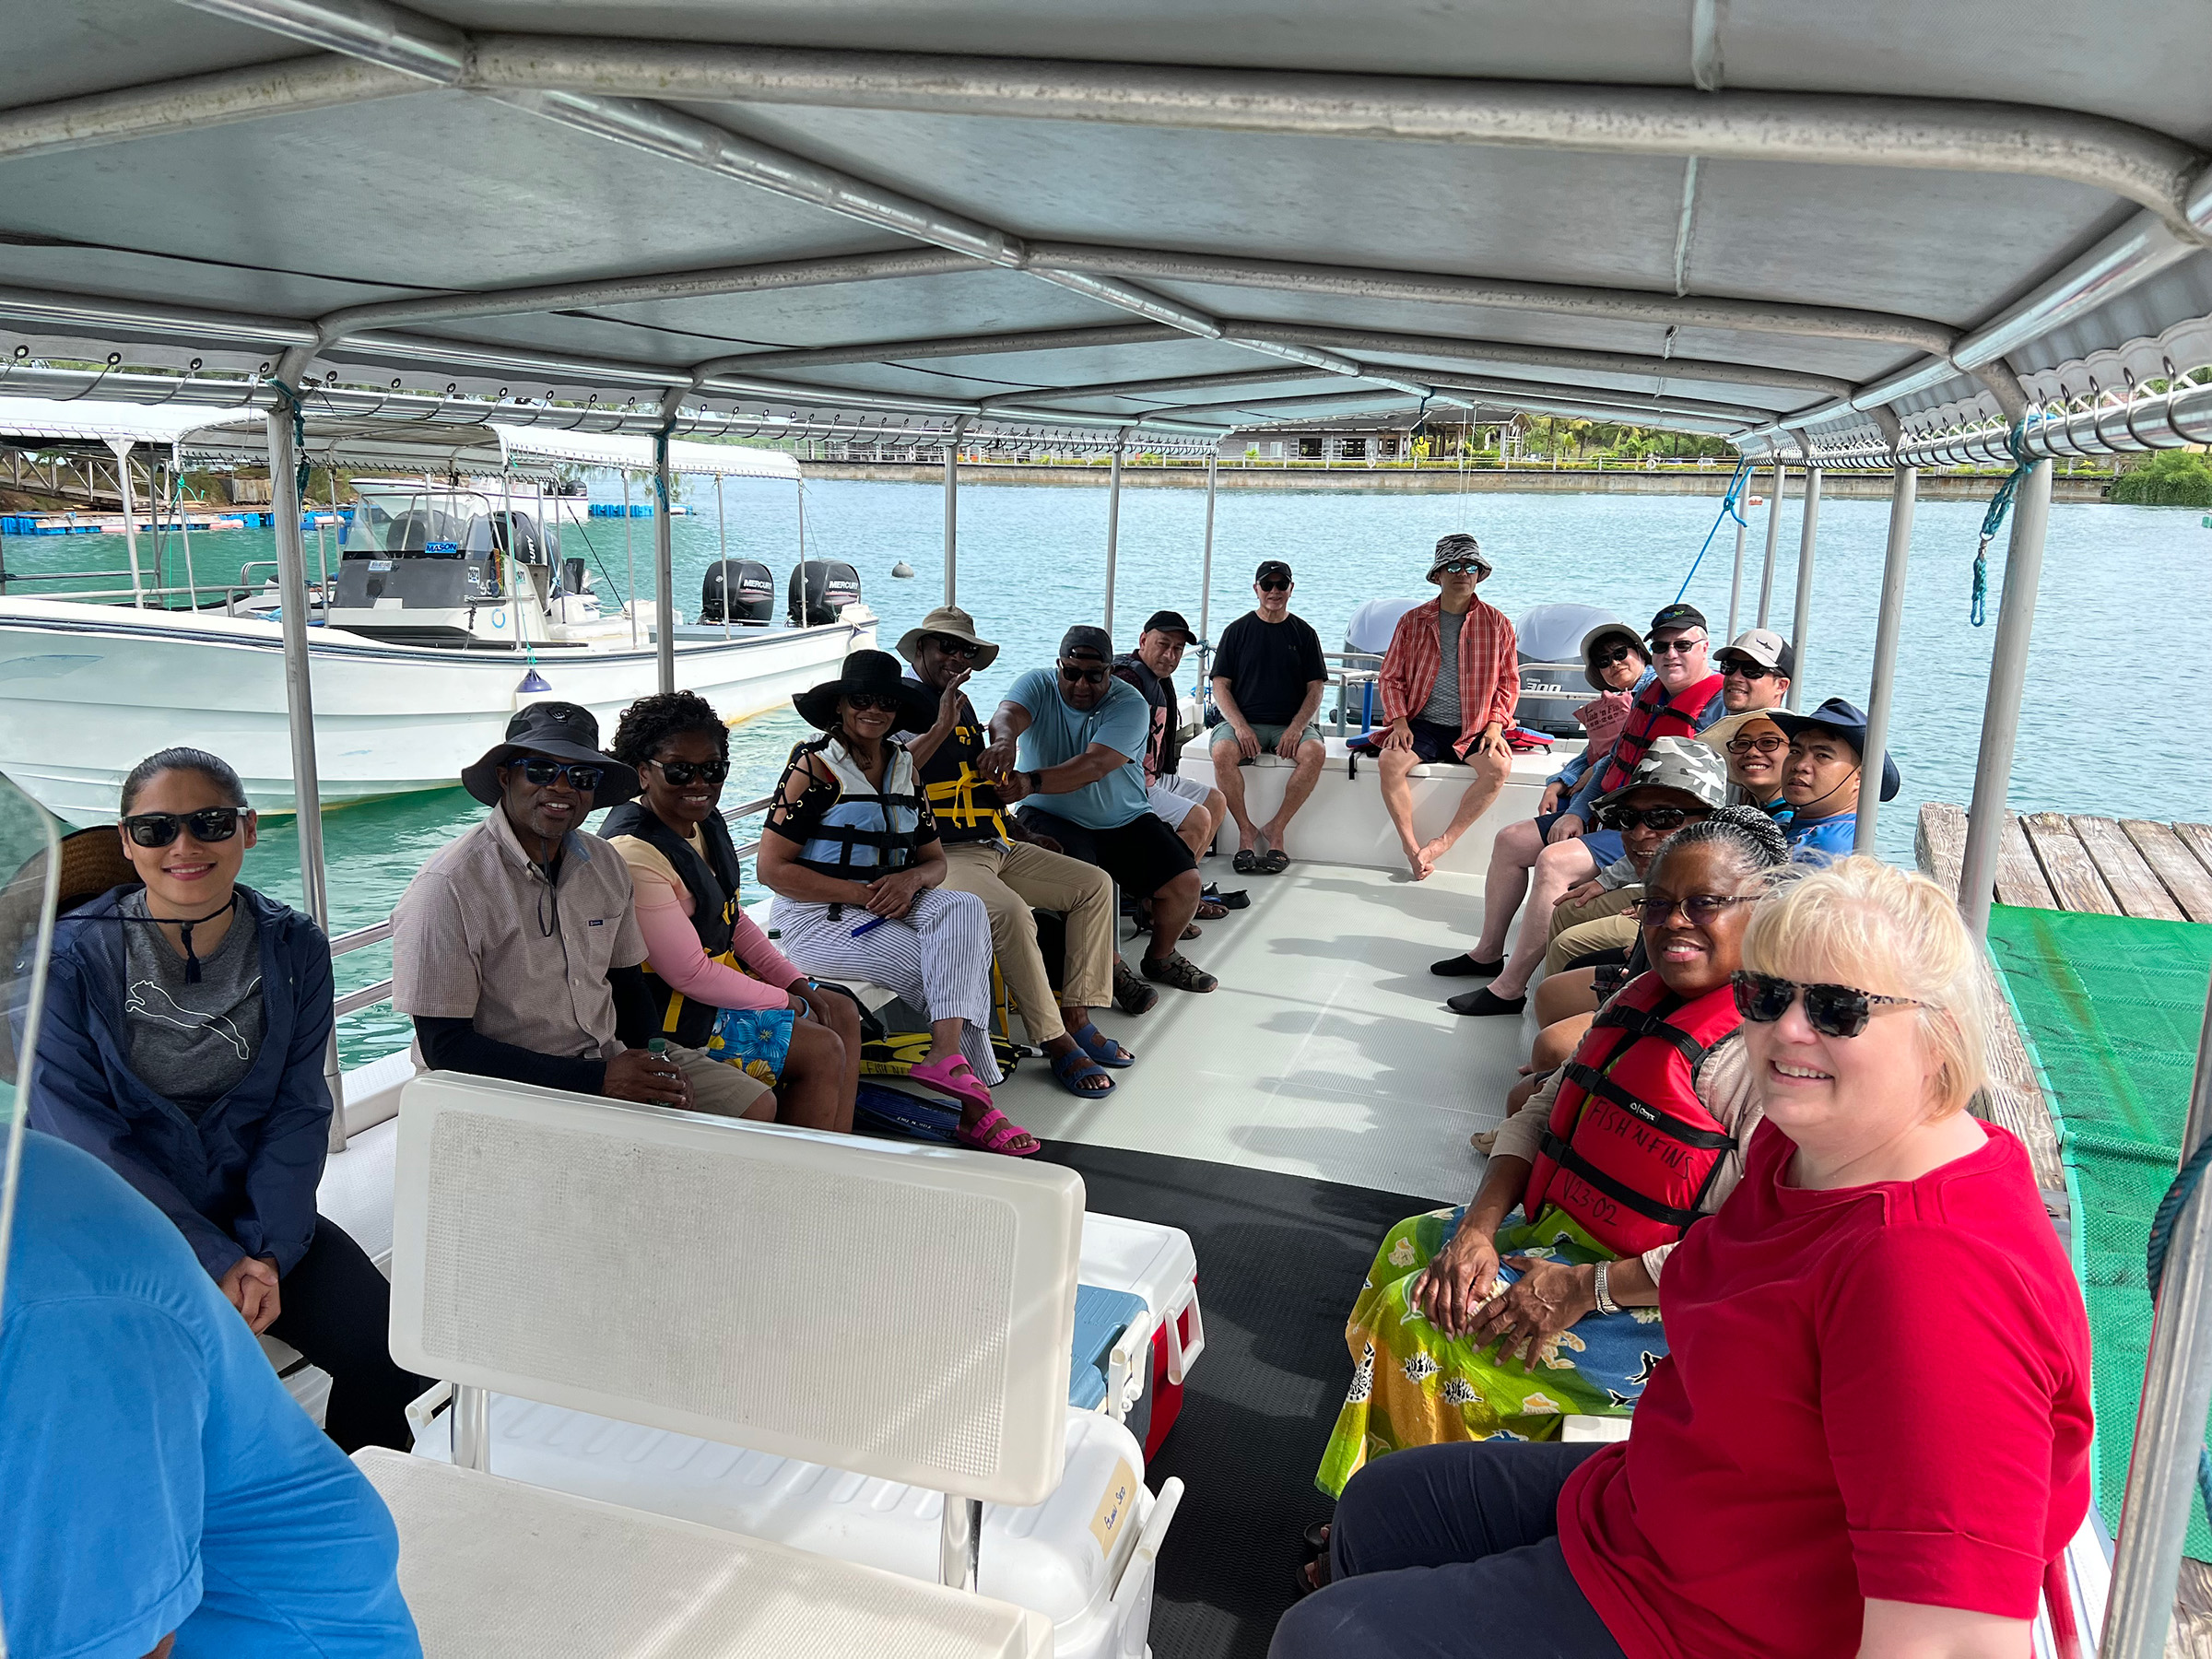 Several people of different ethnicities on a boat smiling